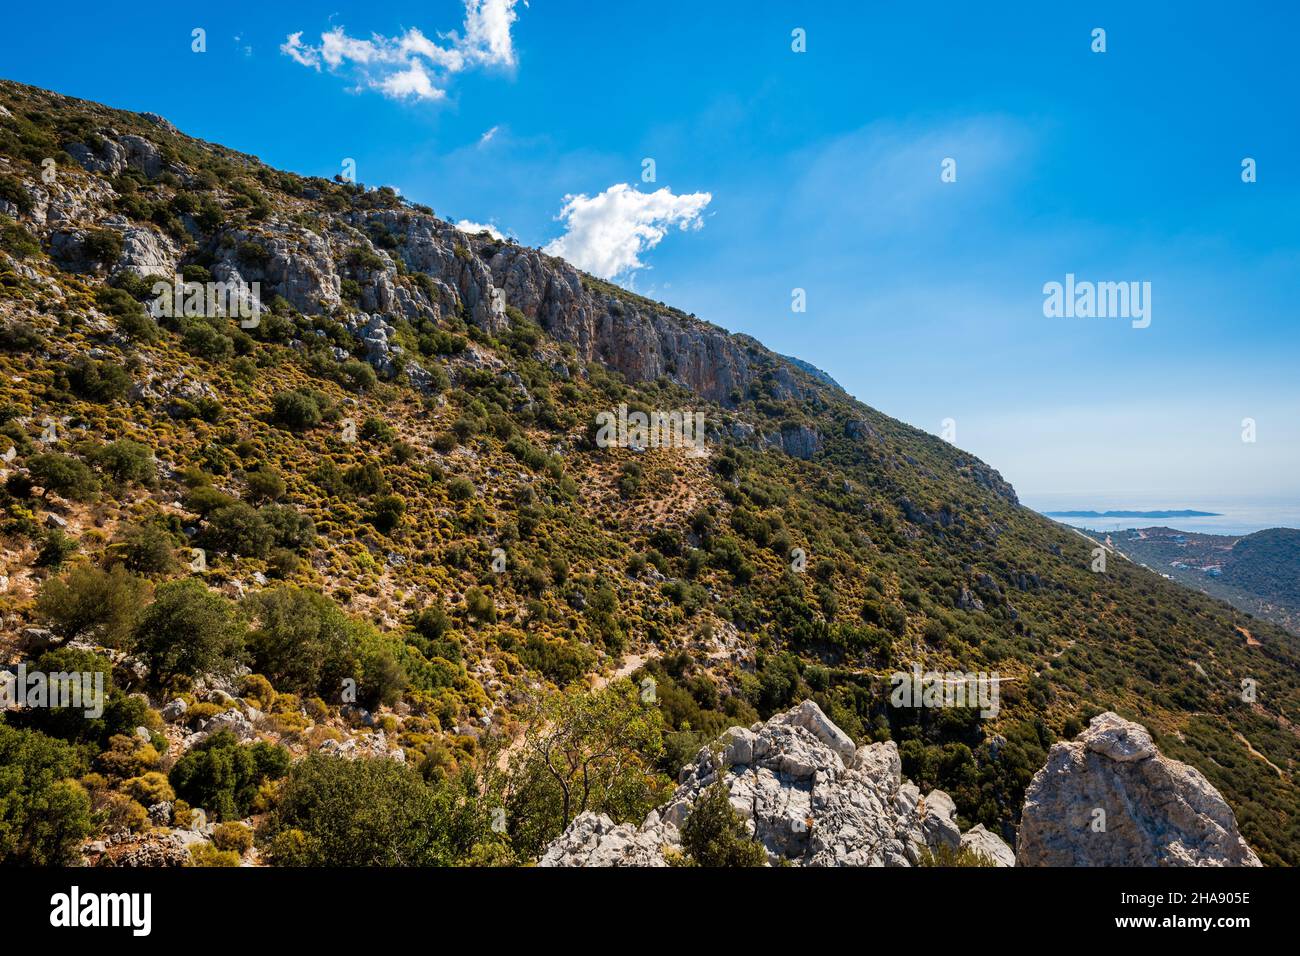 Lycian way hiking and trekking route with mountain view  in Turkish Mediterranean area with rocks, mountains. Mountain landscape image Stock Photo